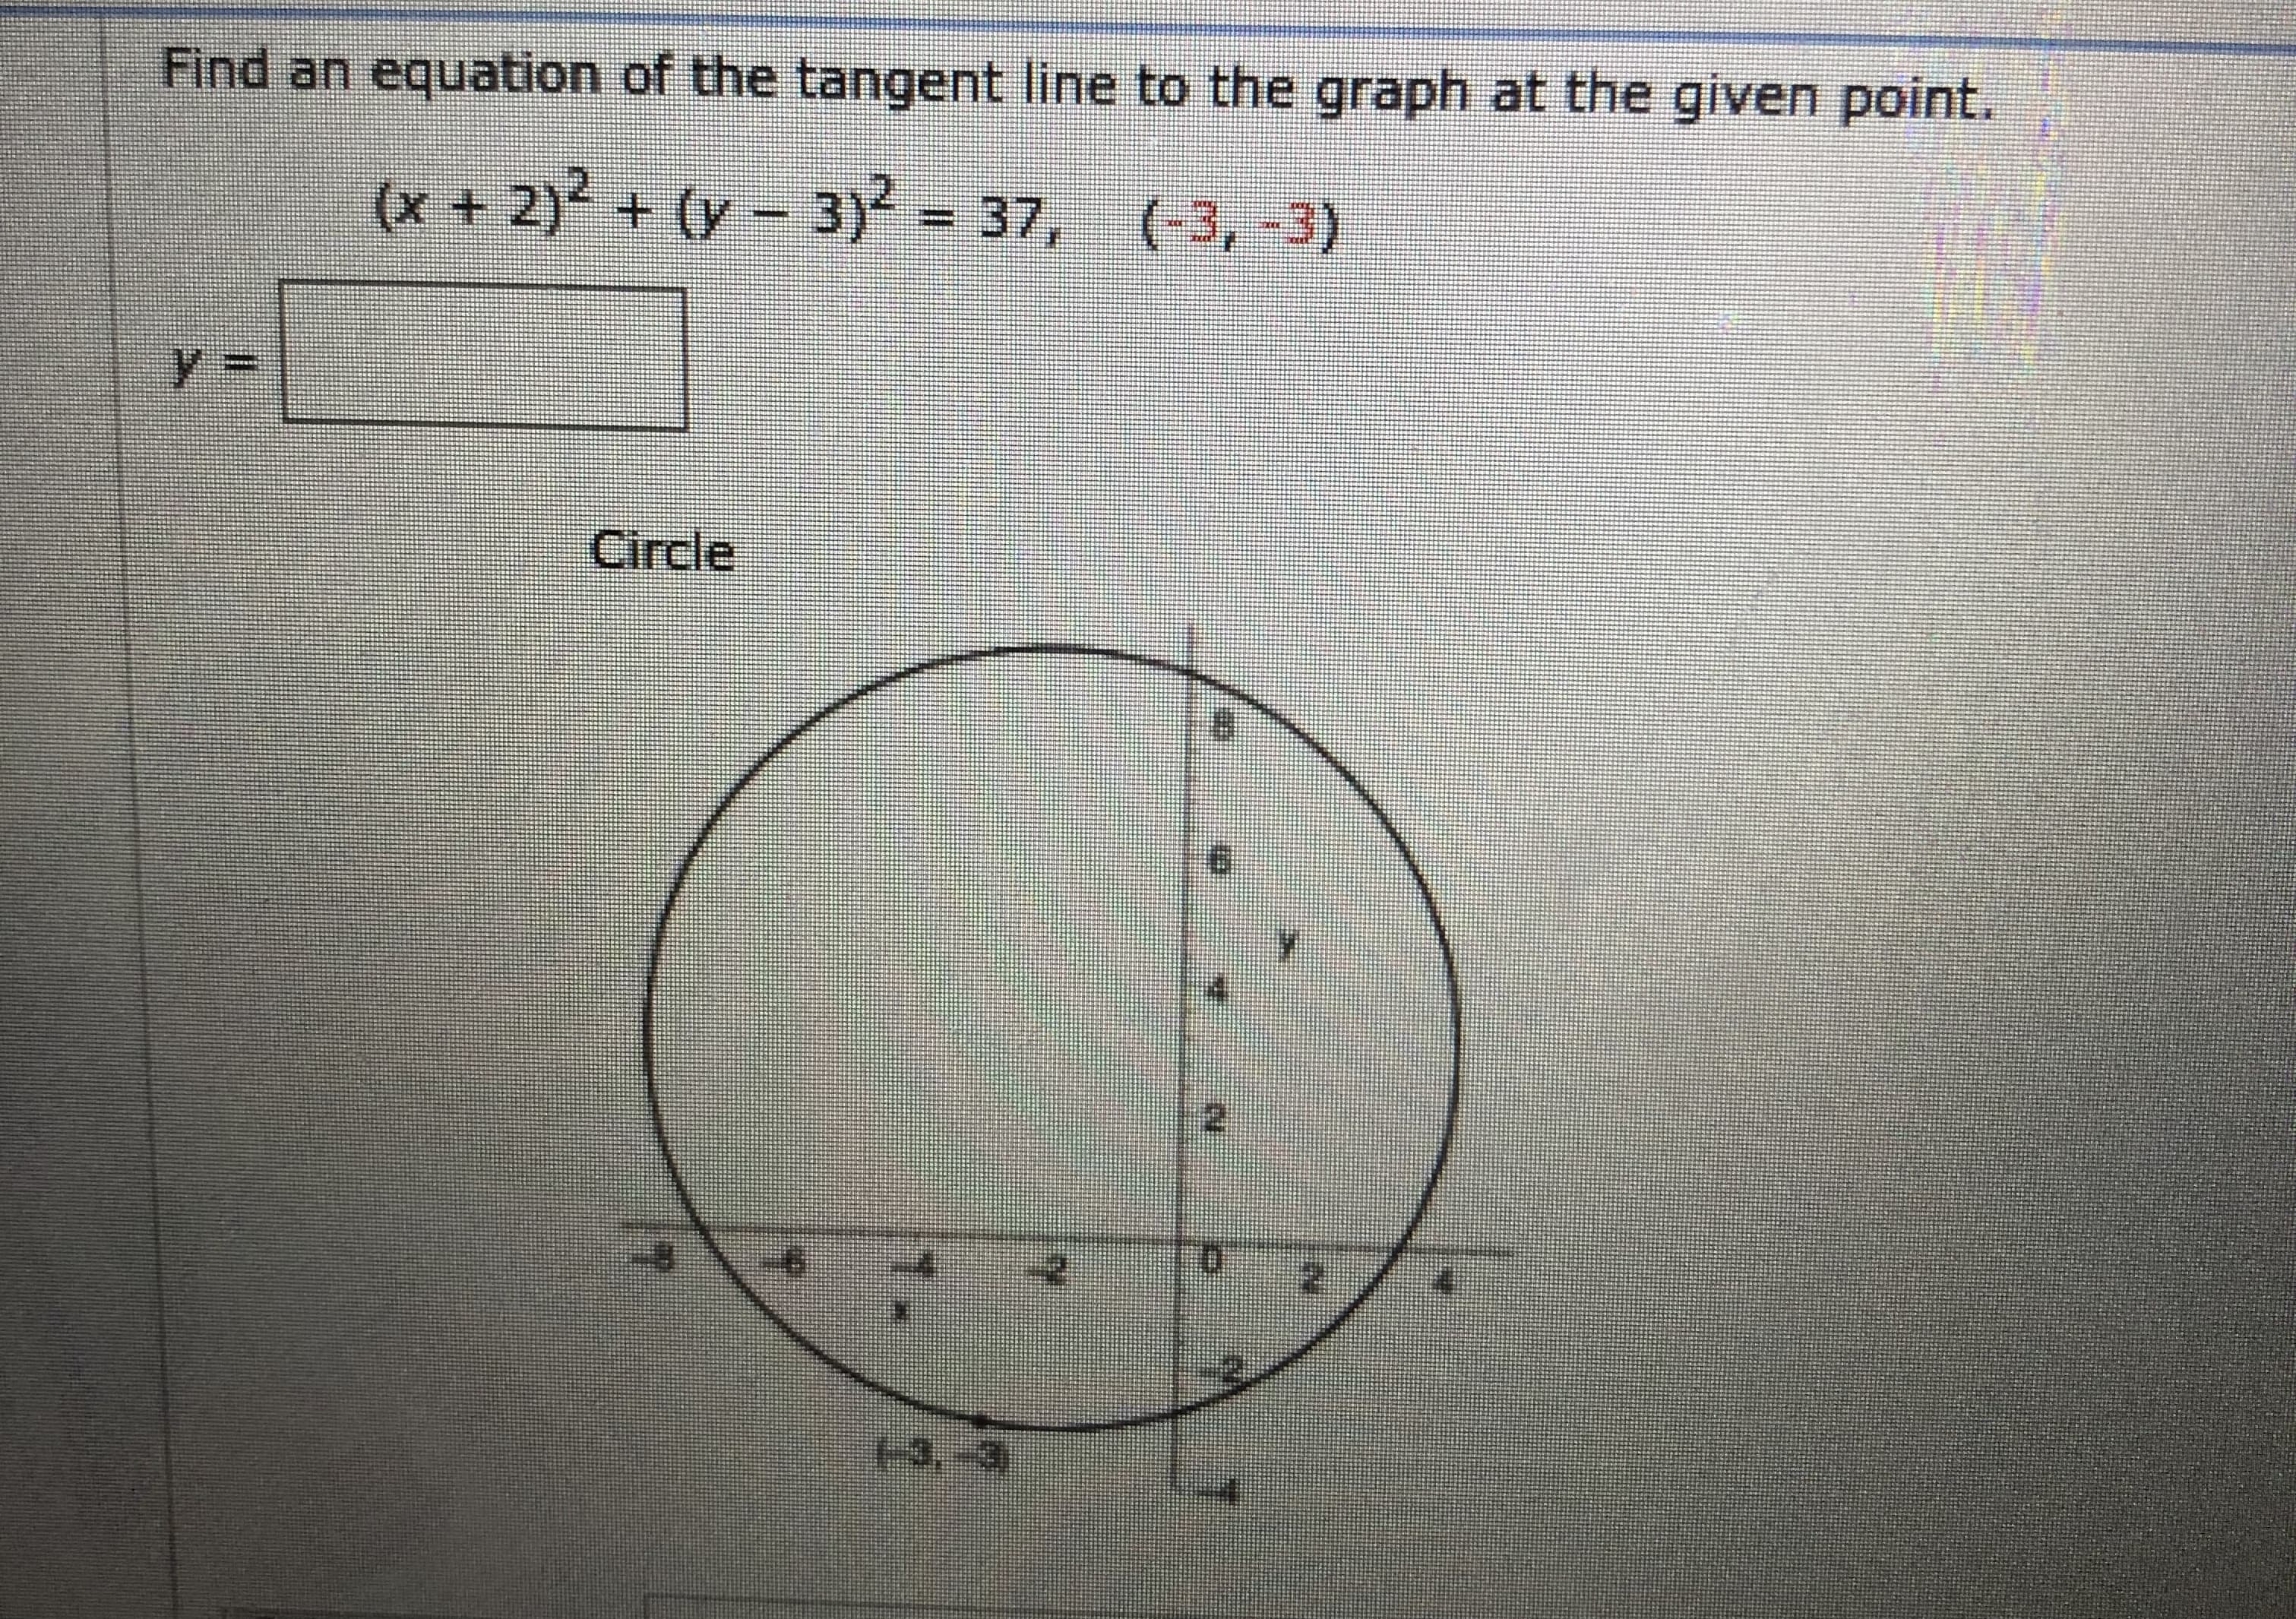 Find an equation of the tangent line to the graph at the given point.
(x +2) + (y- 3) = 37,
(-3,-3)
